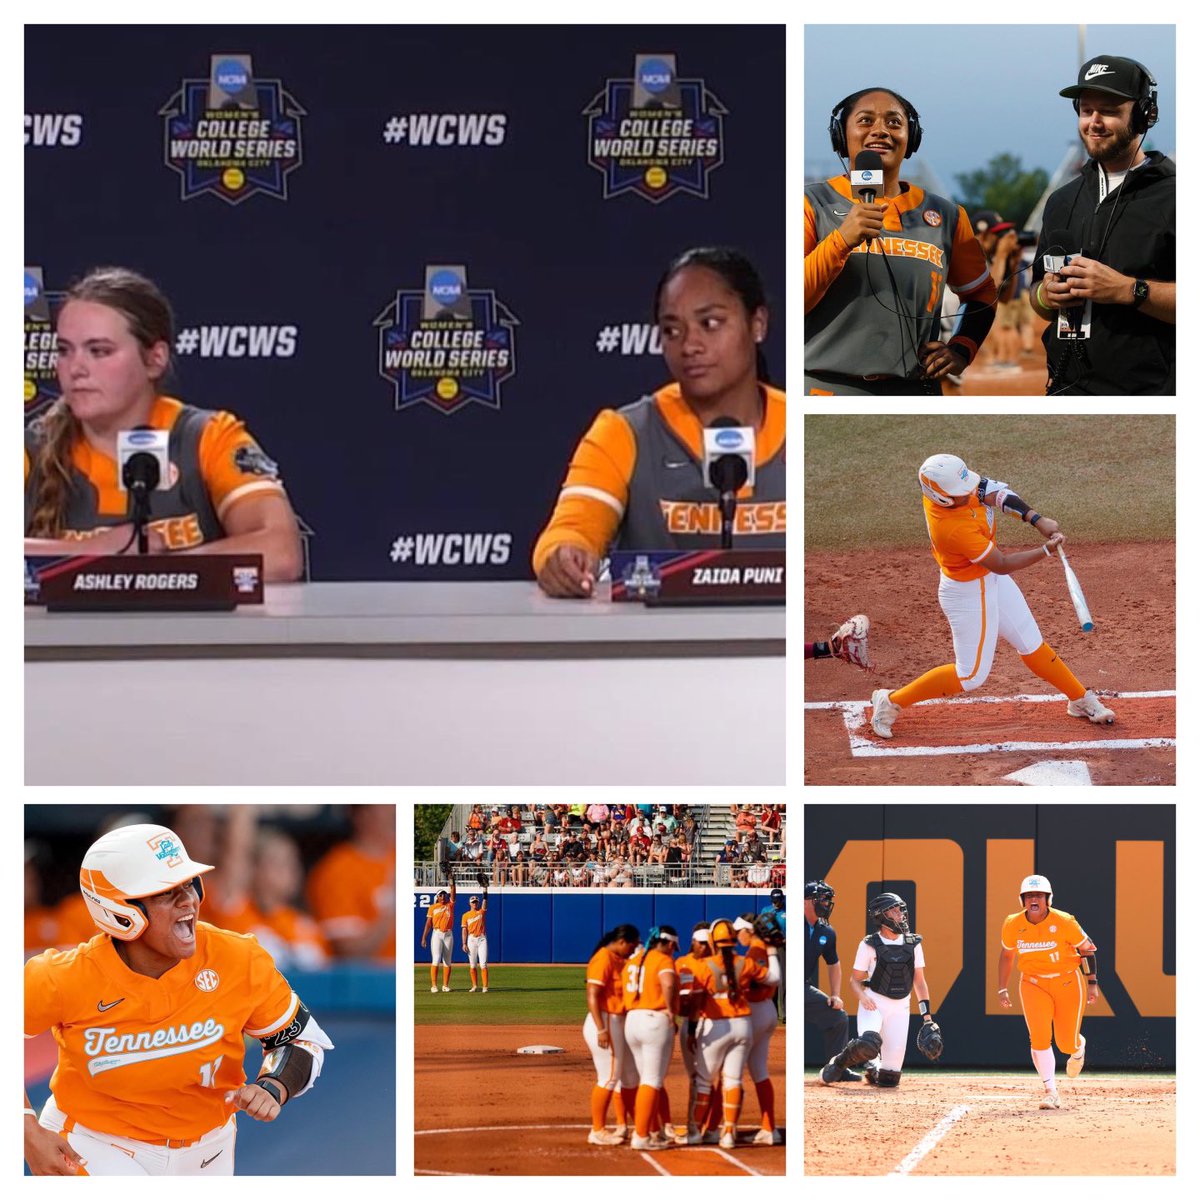 So proud of u niece,  Zaida Puni. You are beautiful inside nout, smart, athletic,n Beasty as heck. Congrats on an amazing year n shining so brightly at the WCWS Semifinals. Loved watching you play at Tennessee. n seem very happy there. Gd luck with all your endeavors. Alofa atu.